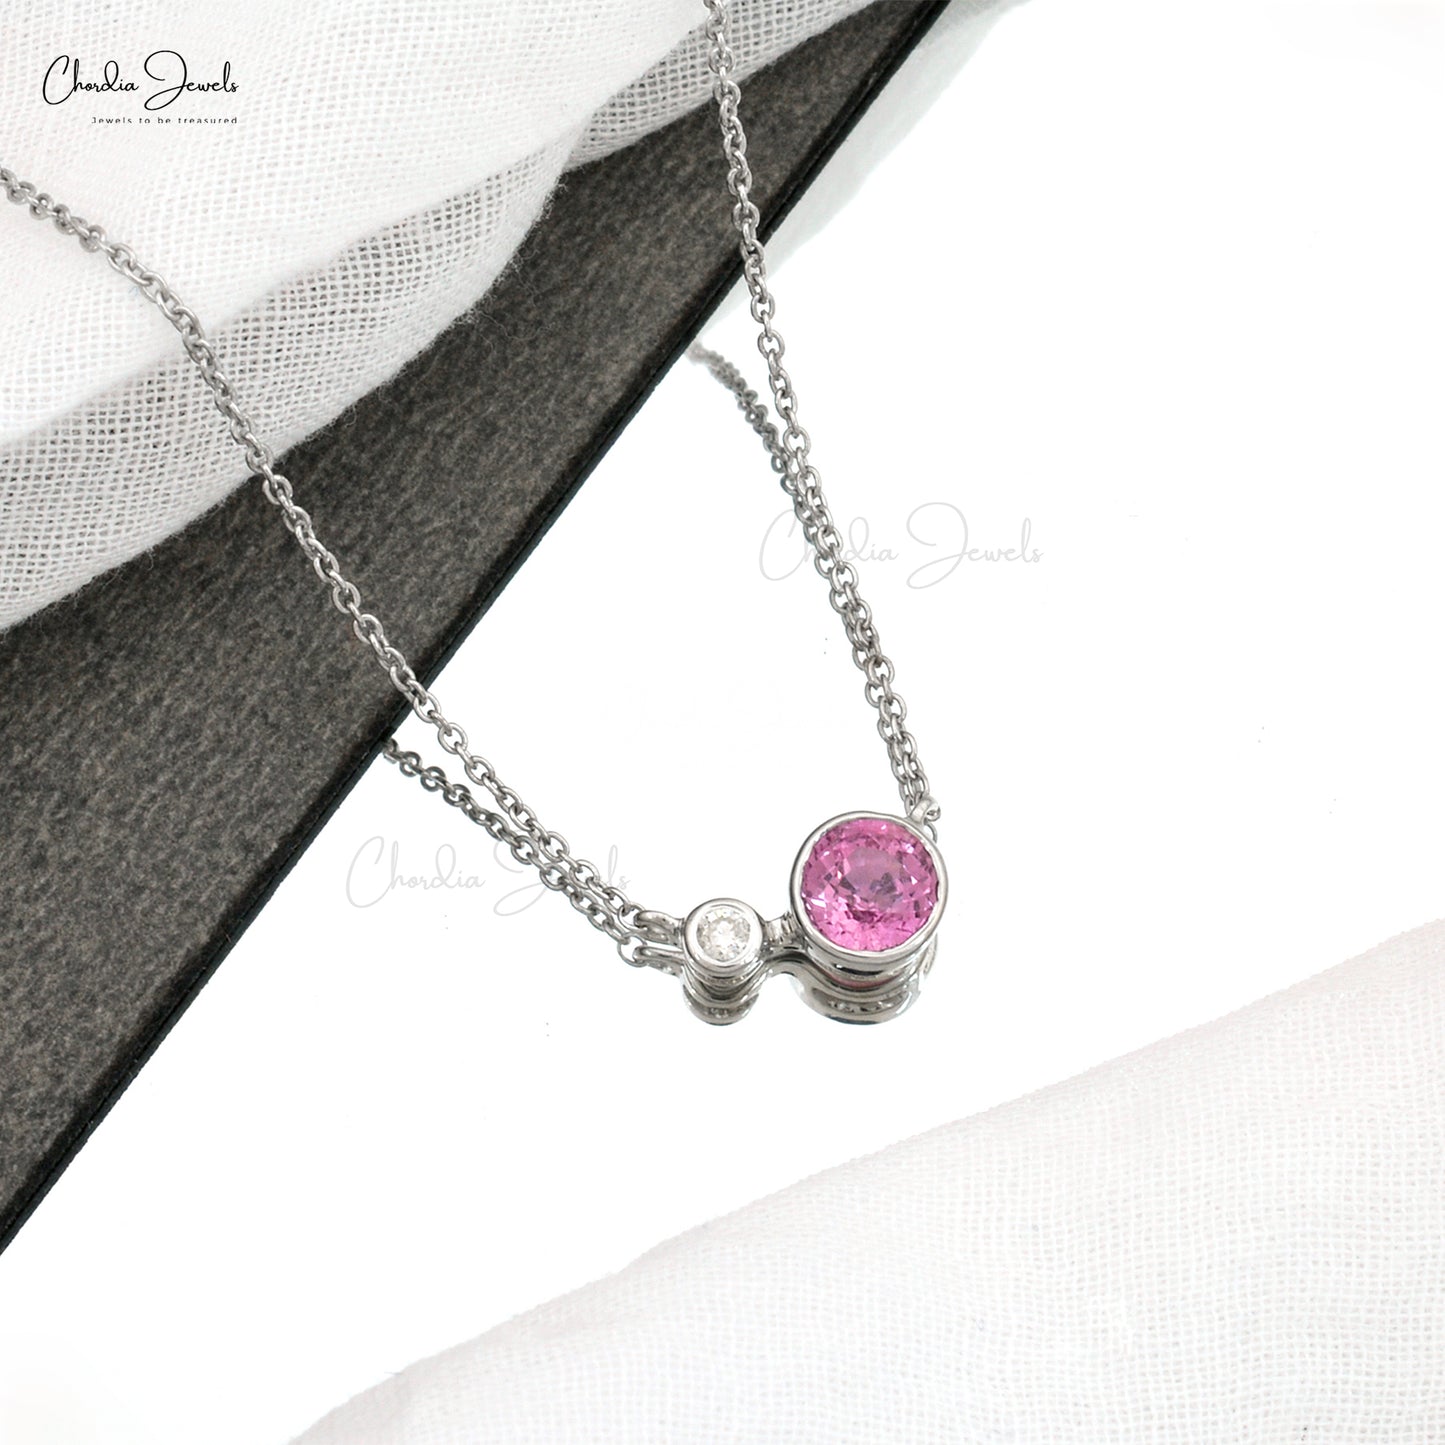 Bezel Set Necklace With 0.6ct Pink Sapphire & Diamond 14k Solid White Gold For Bridesmaid Gift